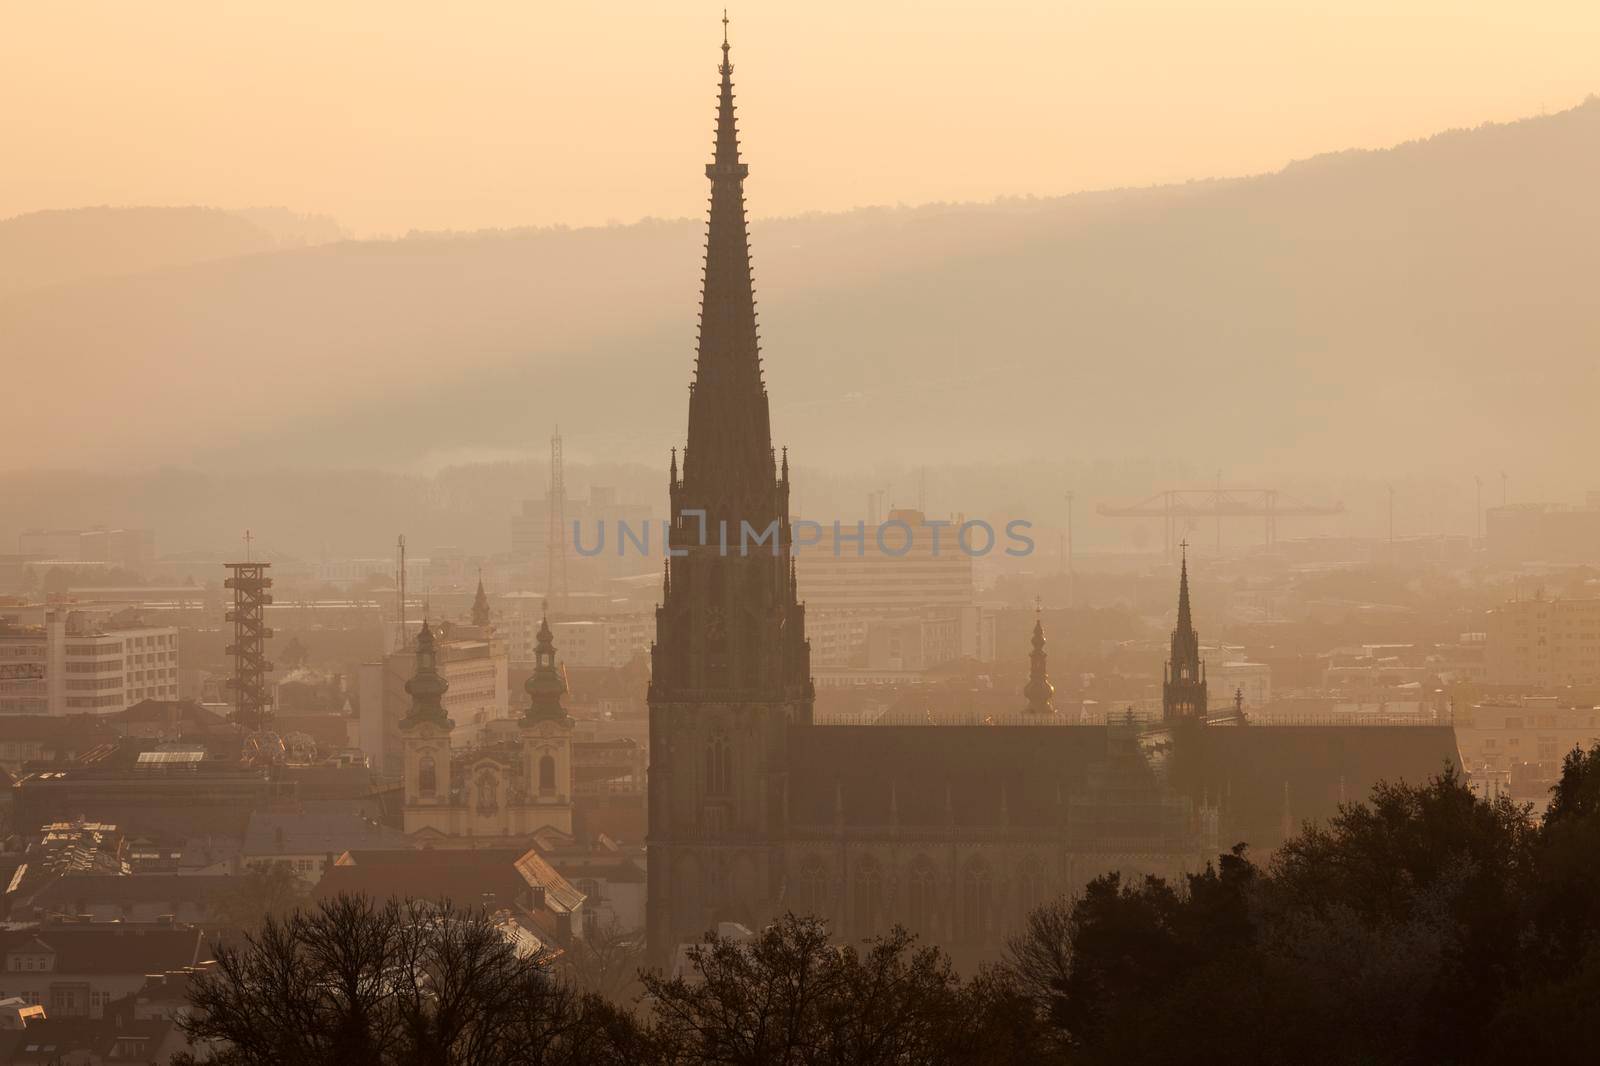 Linz panorama at sunrise by benkrut